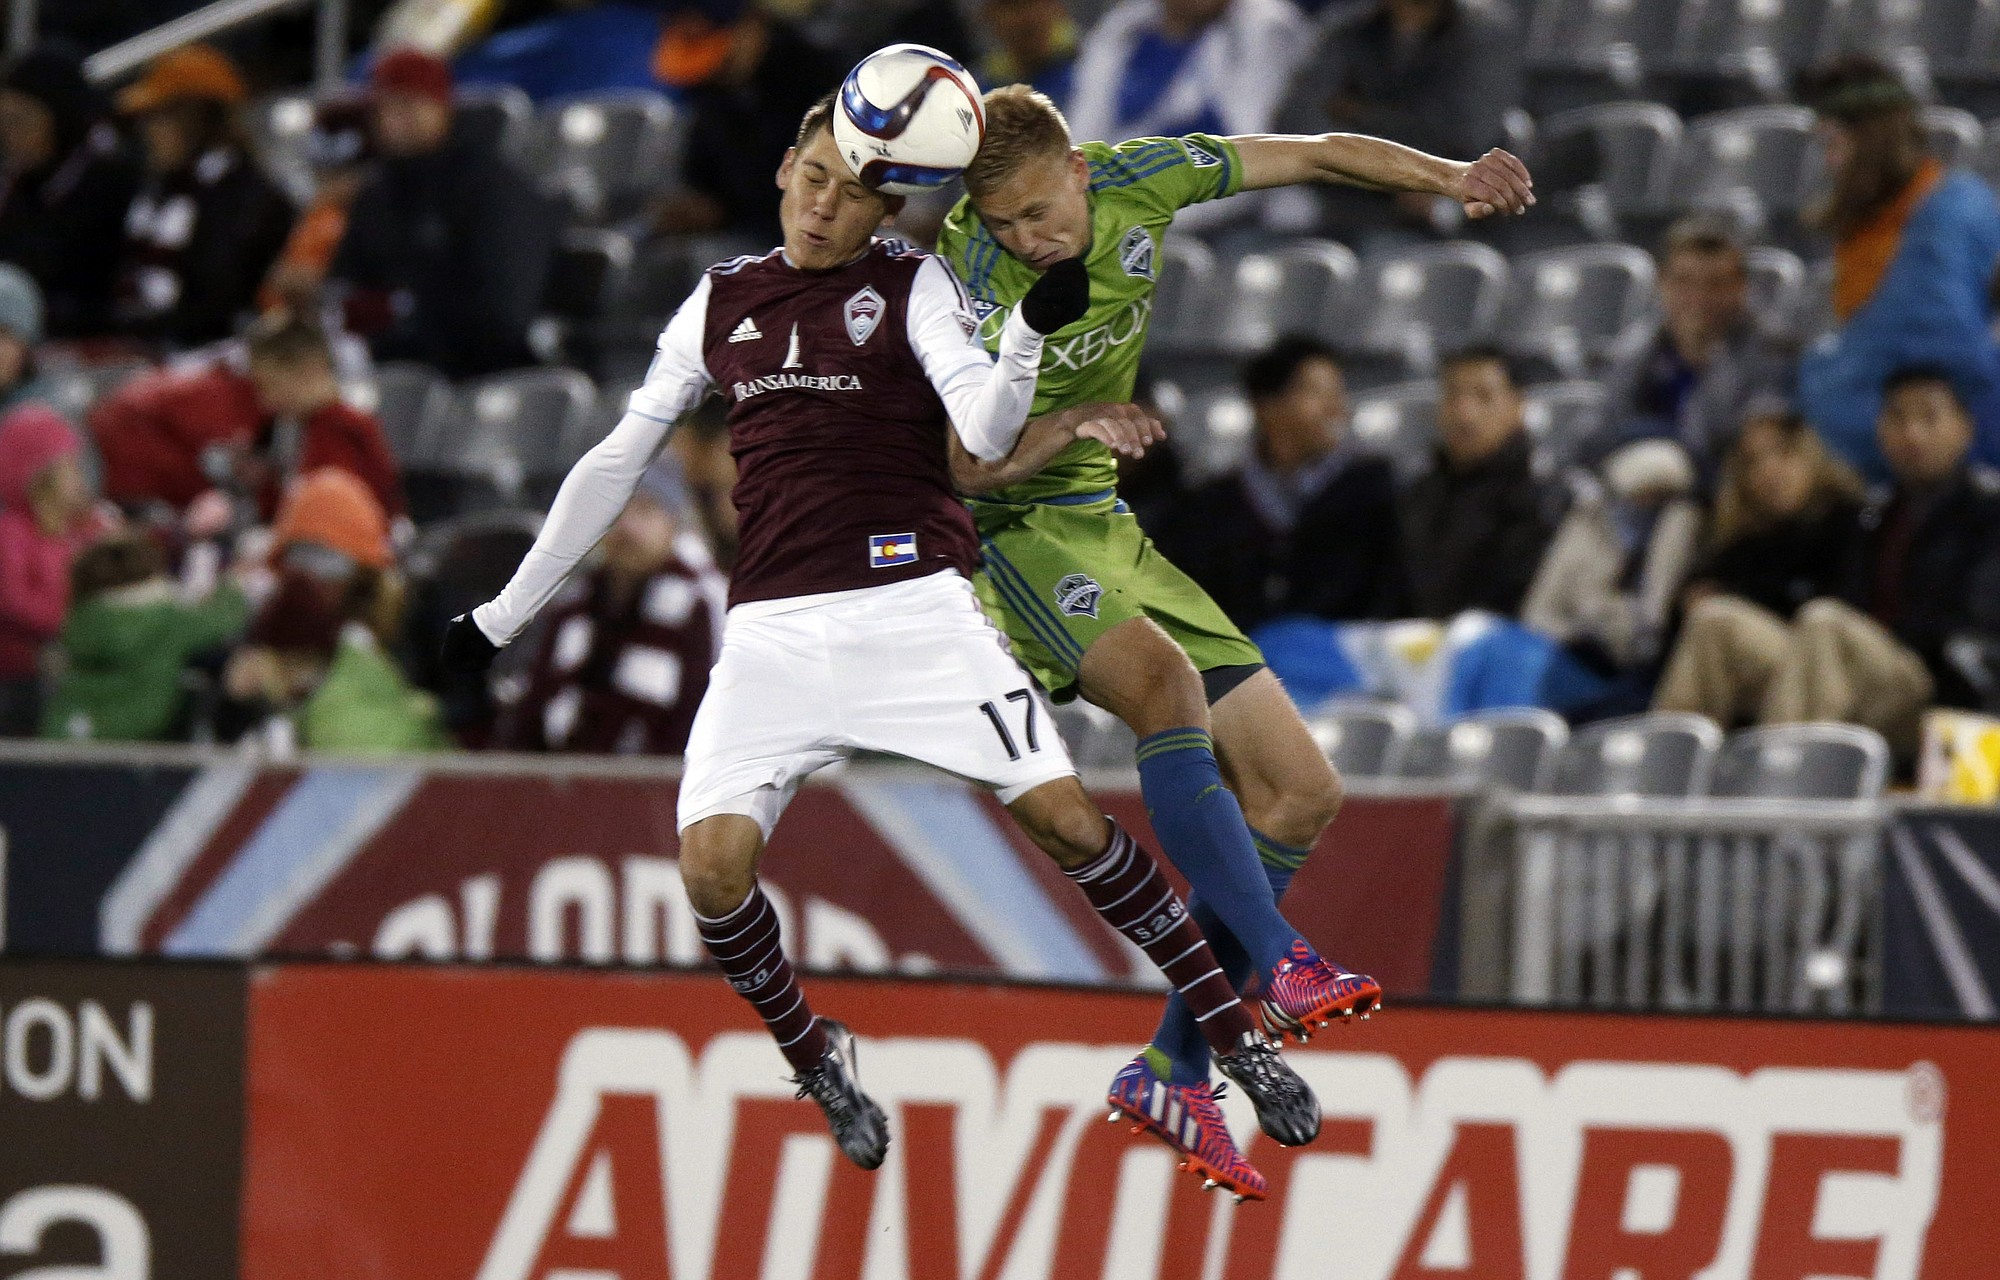 Colorado Rapids midfielder Dillon Serna, left, tries to head the ball with Seattle Sounders midfielder Andy Rose in the second half Saturday, April 18, 2015, in Commerce City, Colo. Seattle won 3-1.